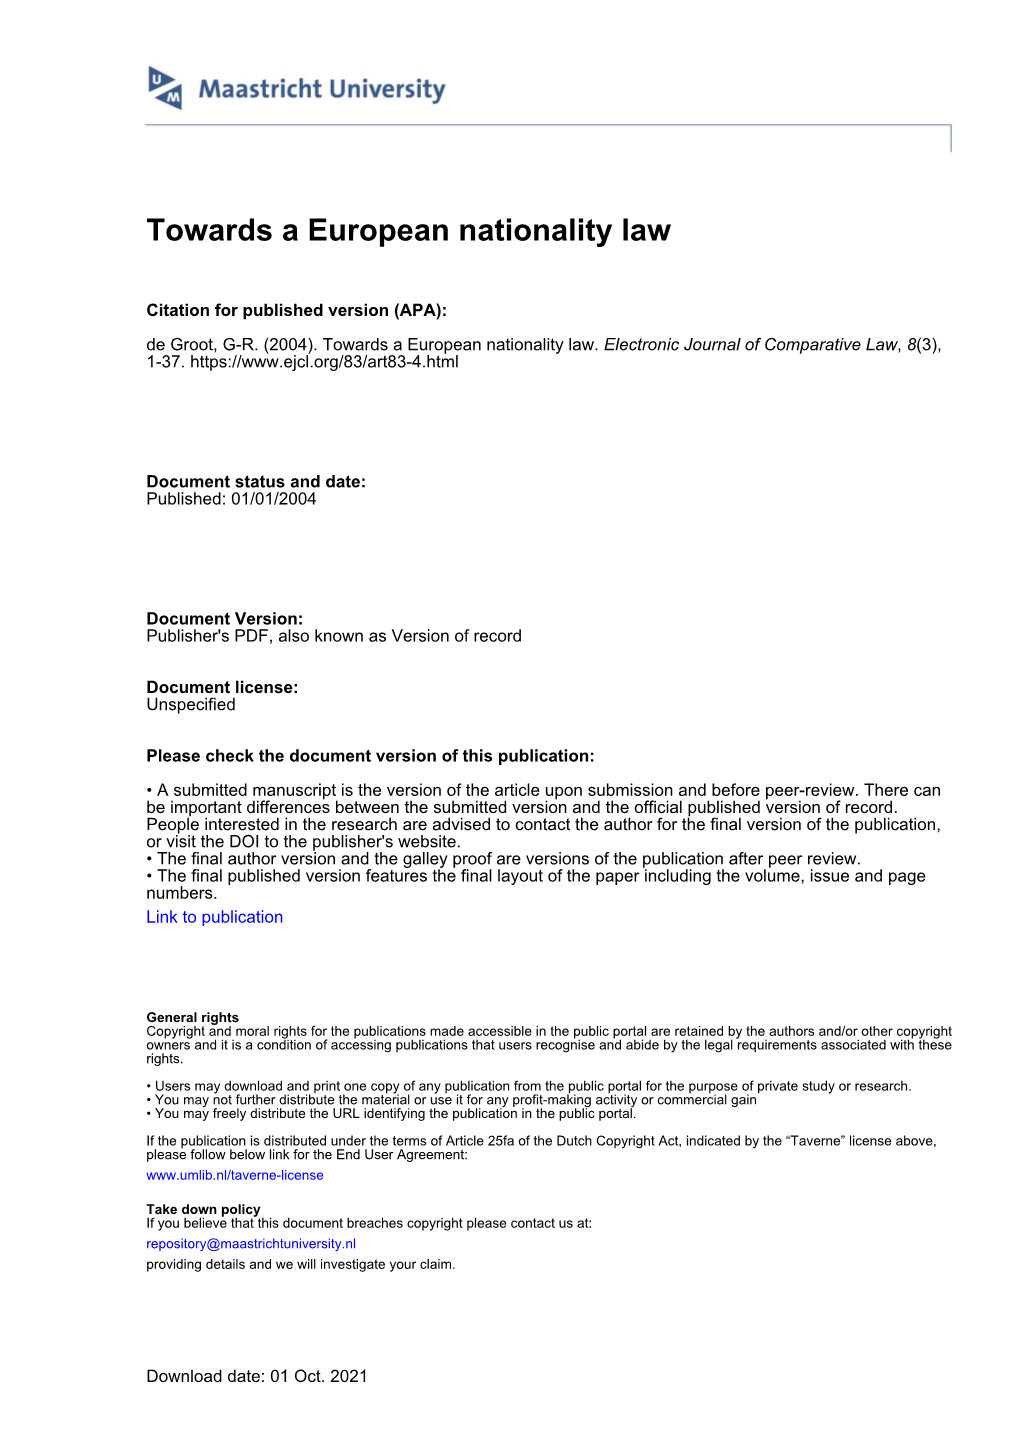 Towards a European Nationality Law